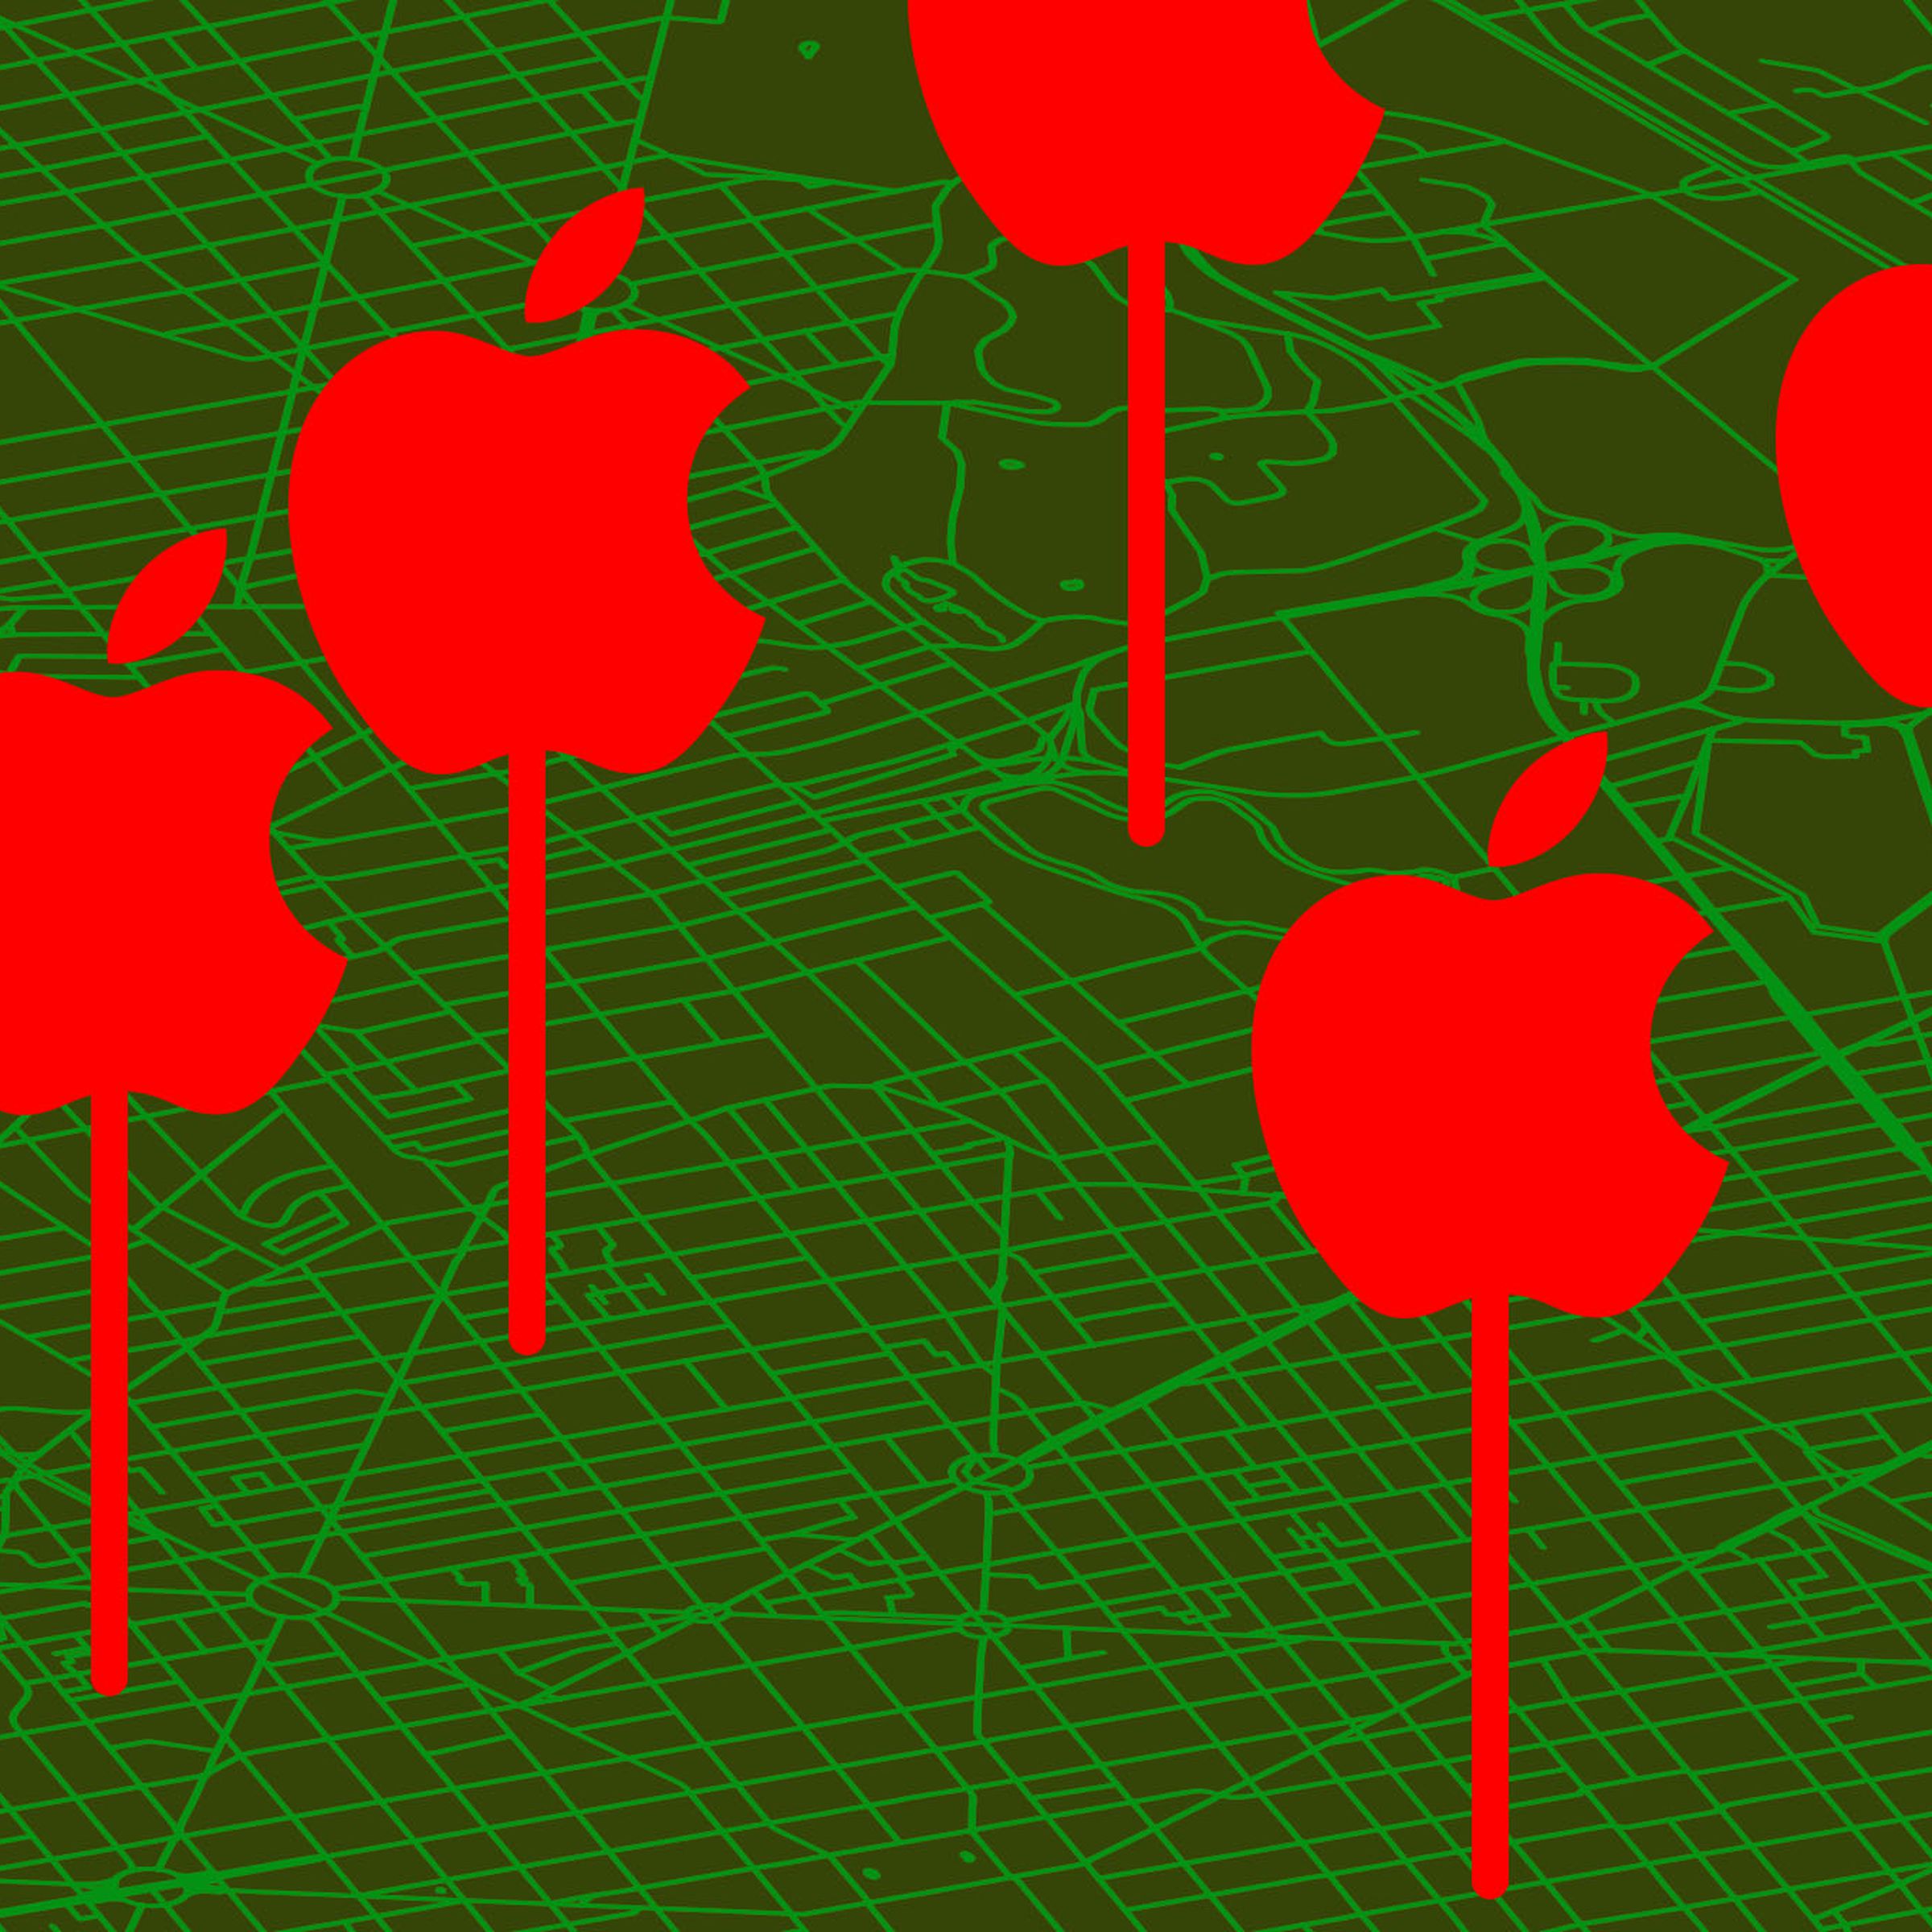 Illustration of various Apple pins dropped on a map.